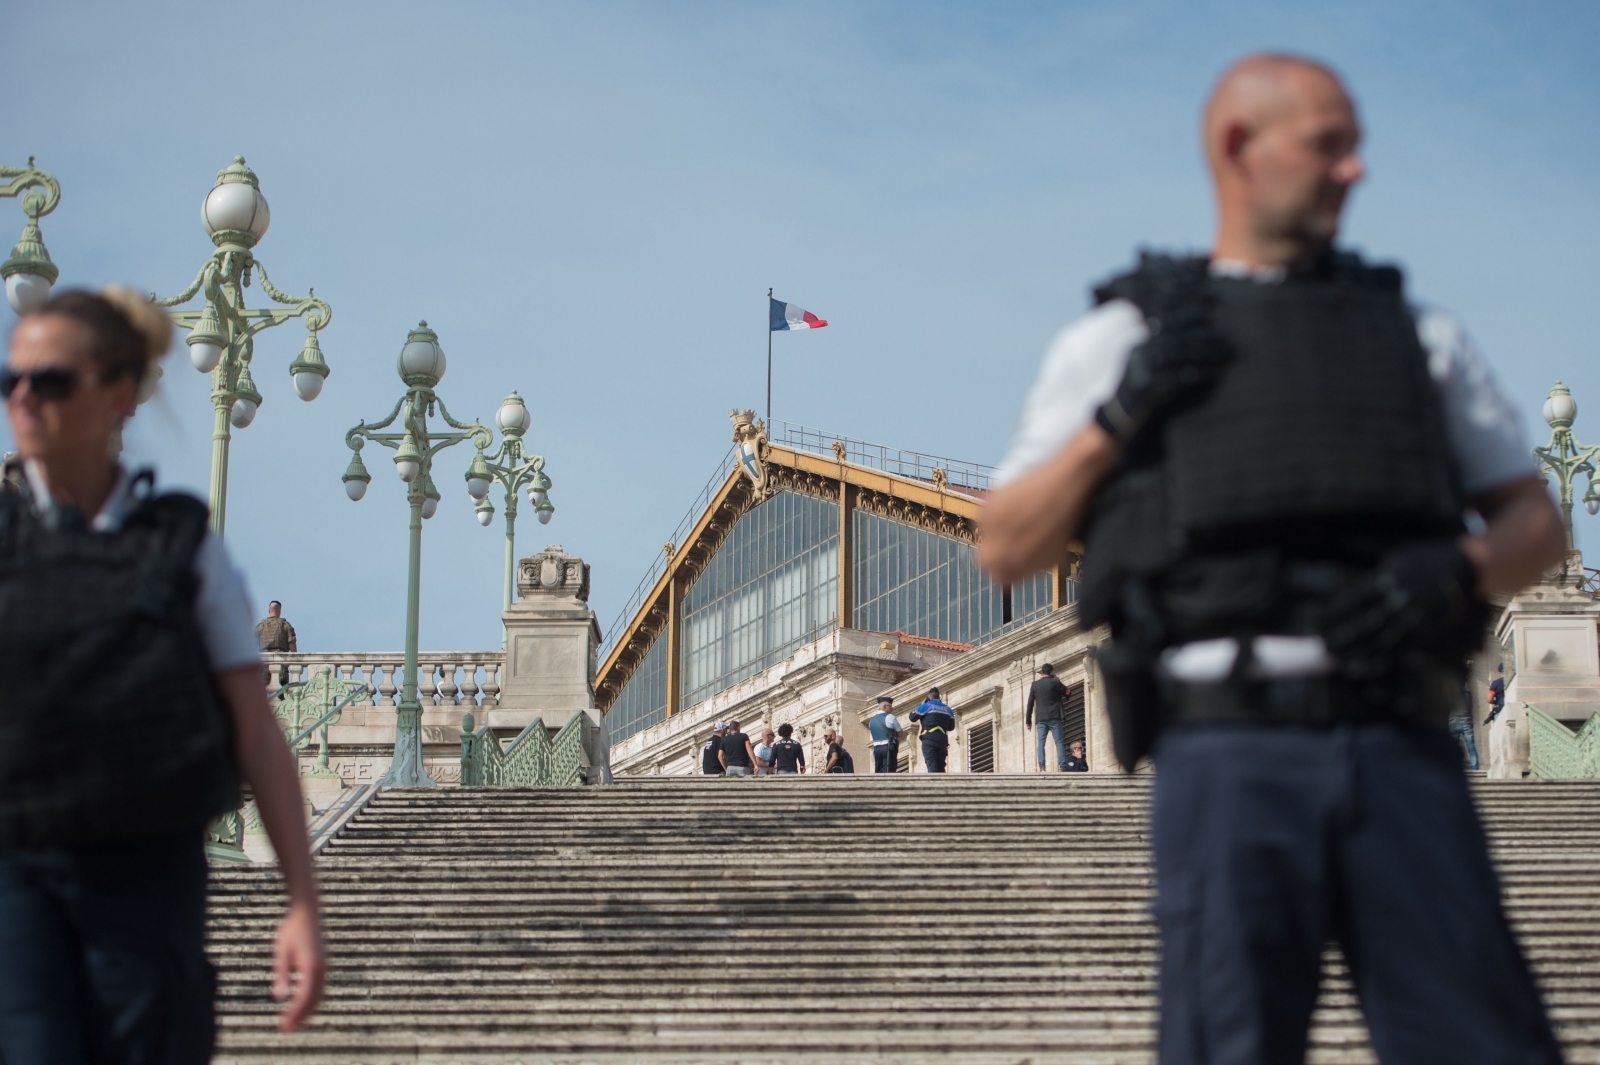 French police outside Marseille station